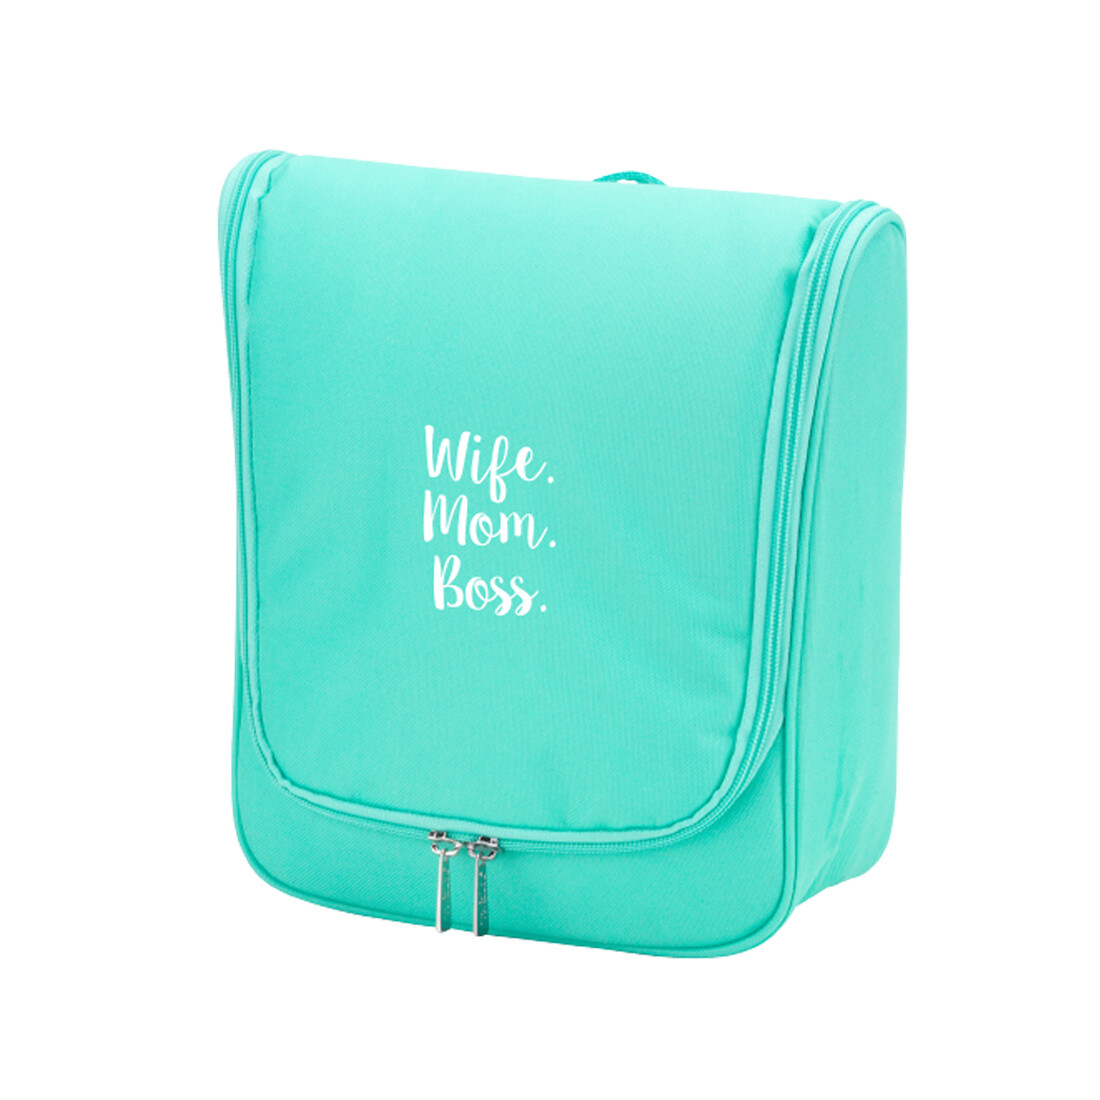 Wife.Mom.Boss Mint Hanging Travel Case